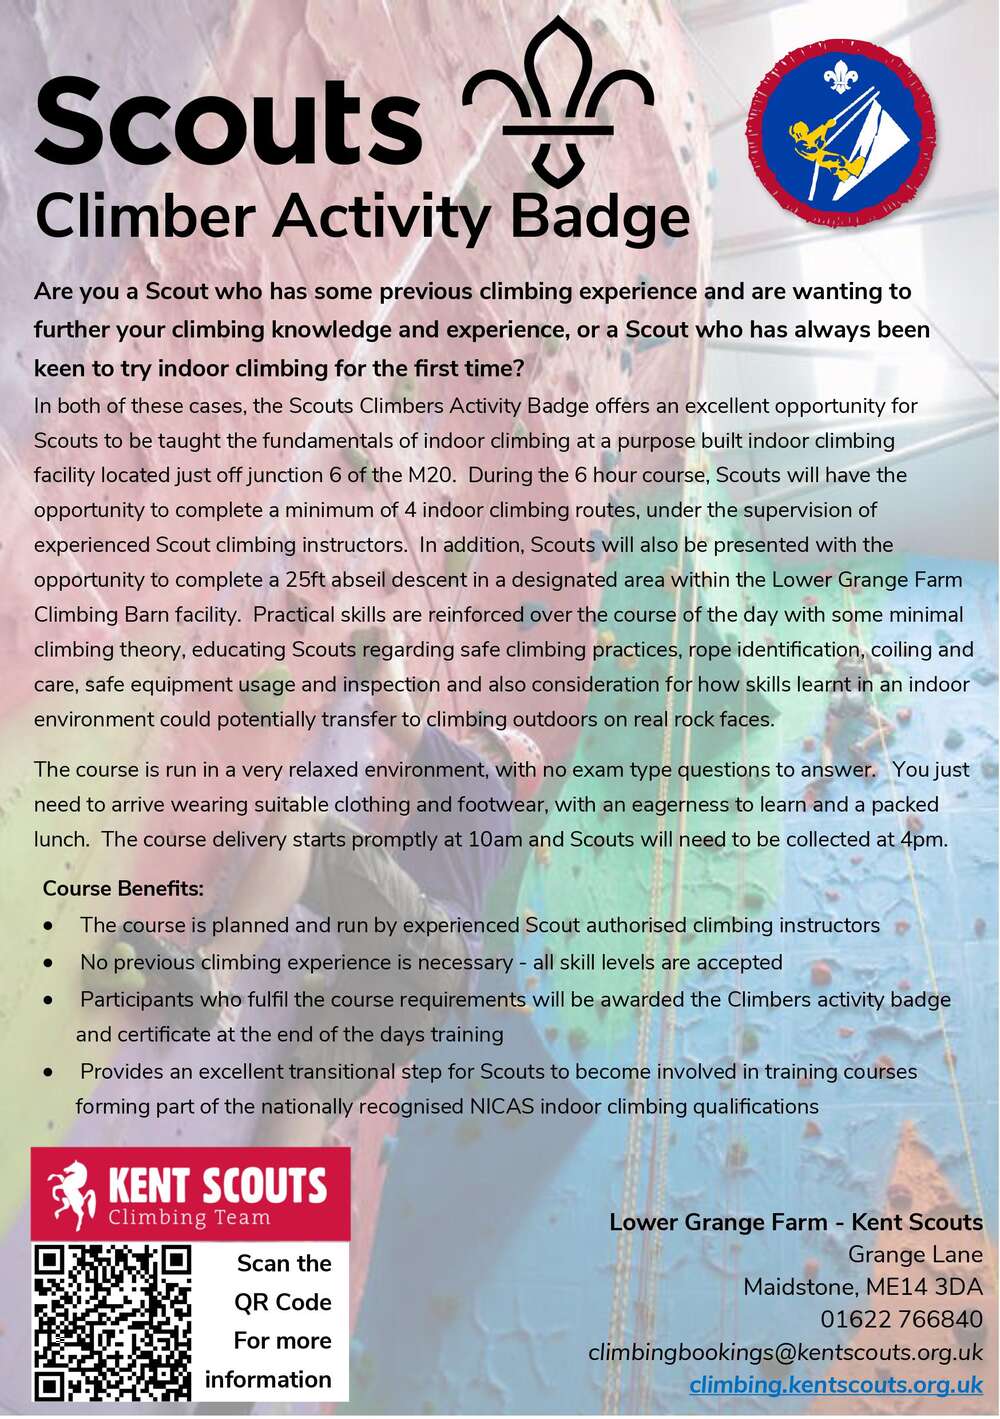 Scouts Climber Activity Badge Courses